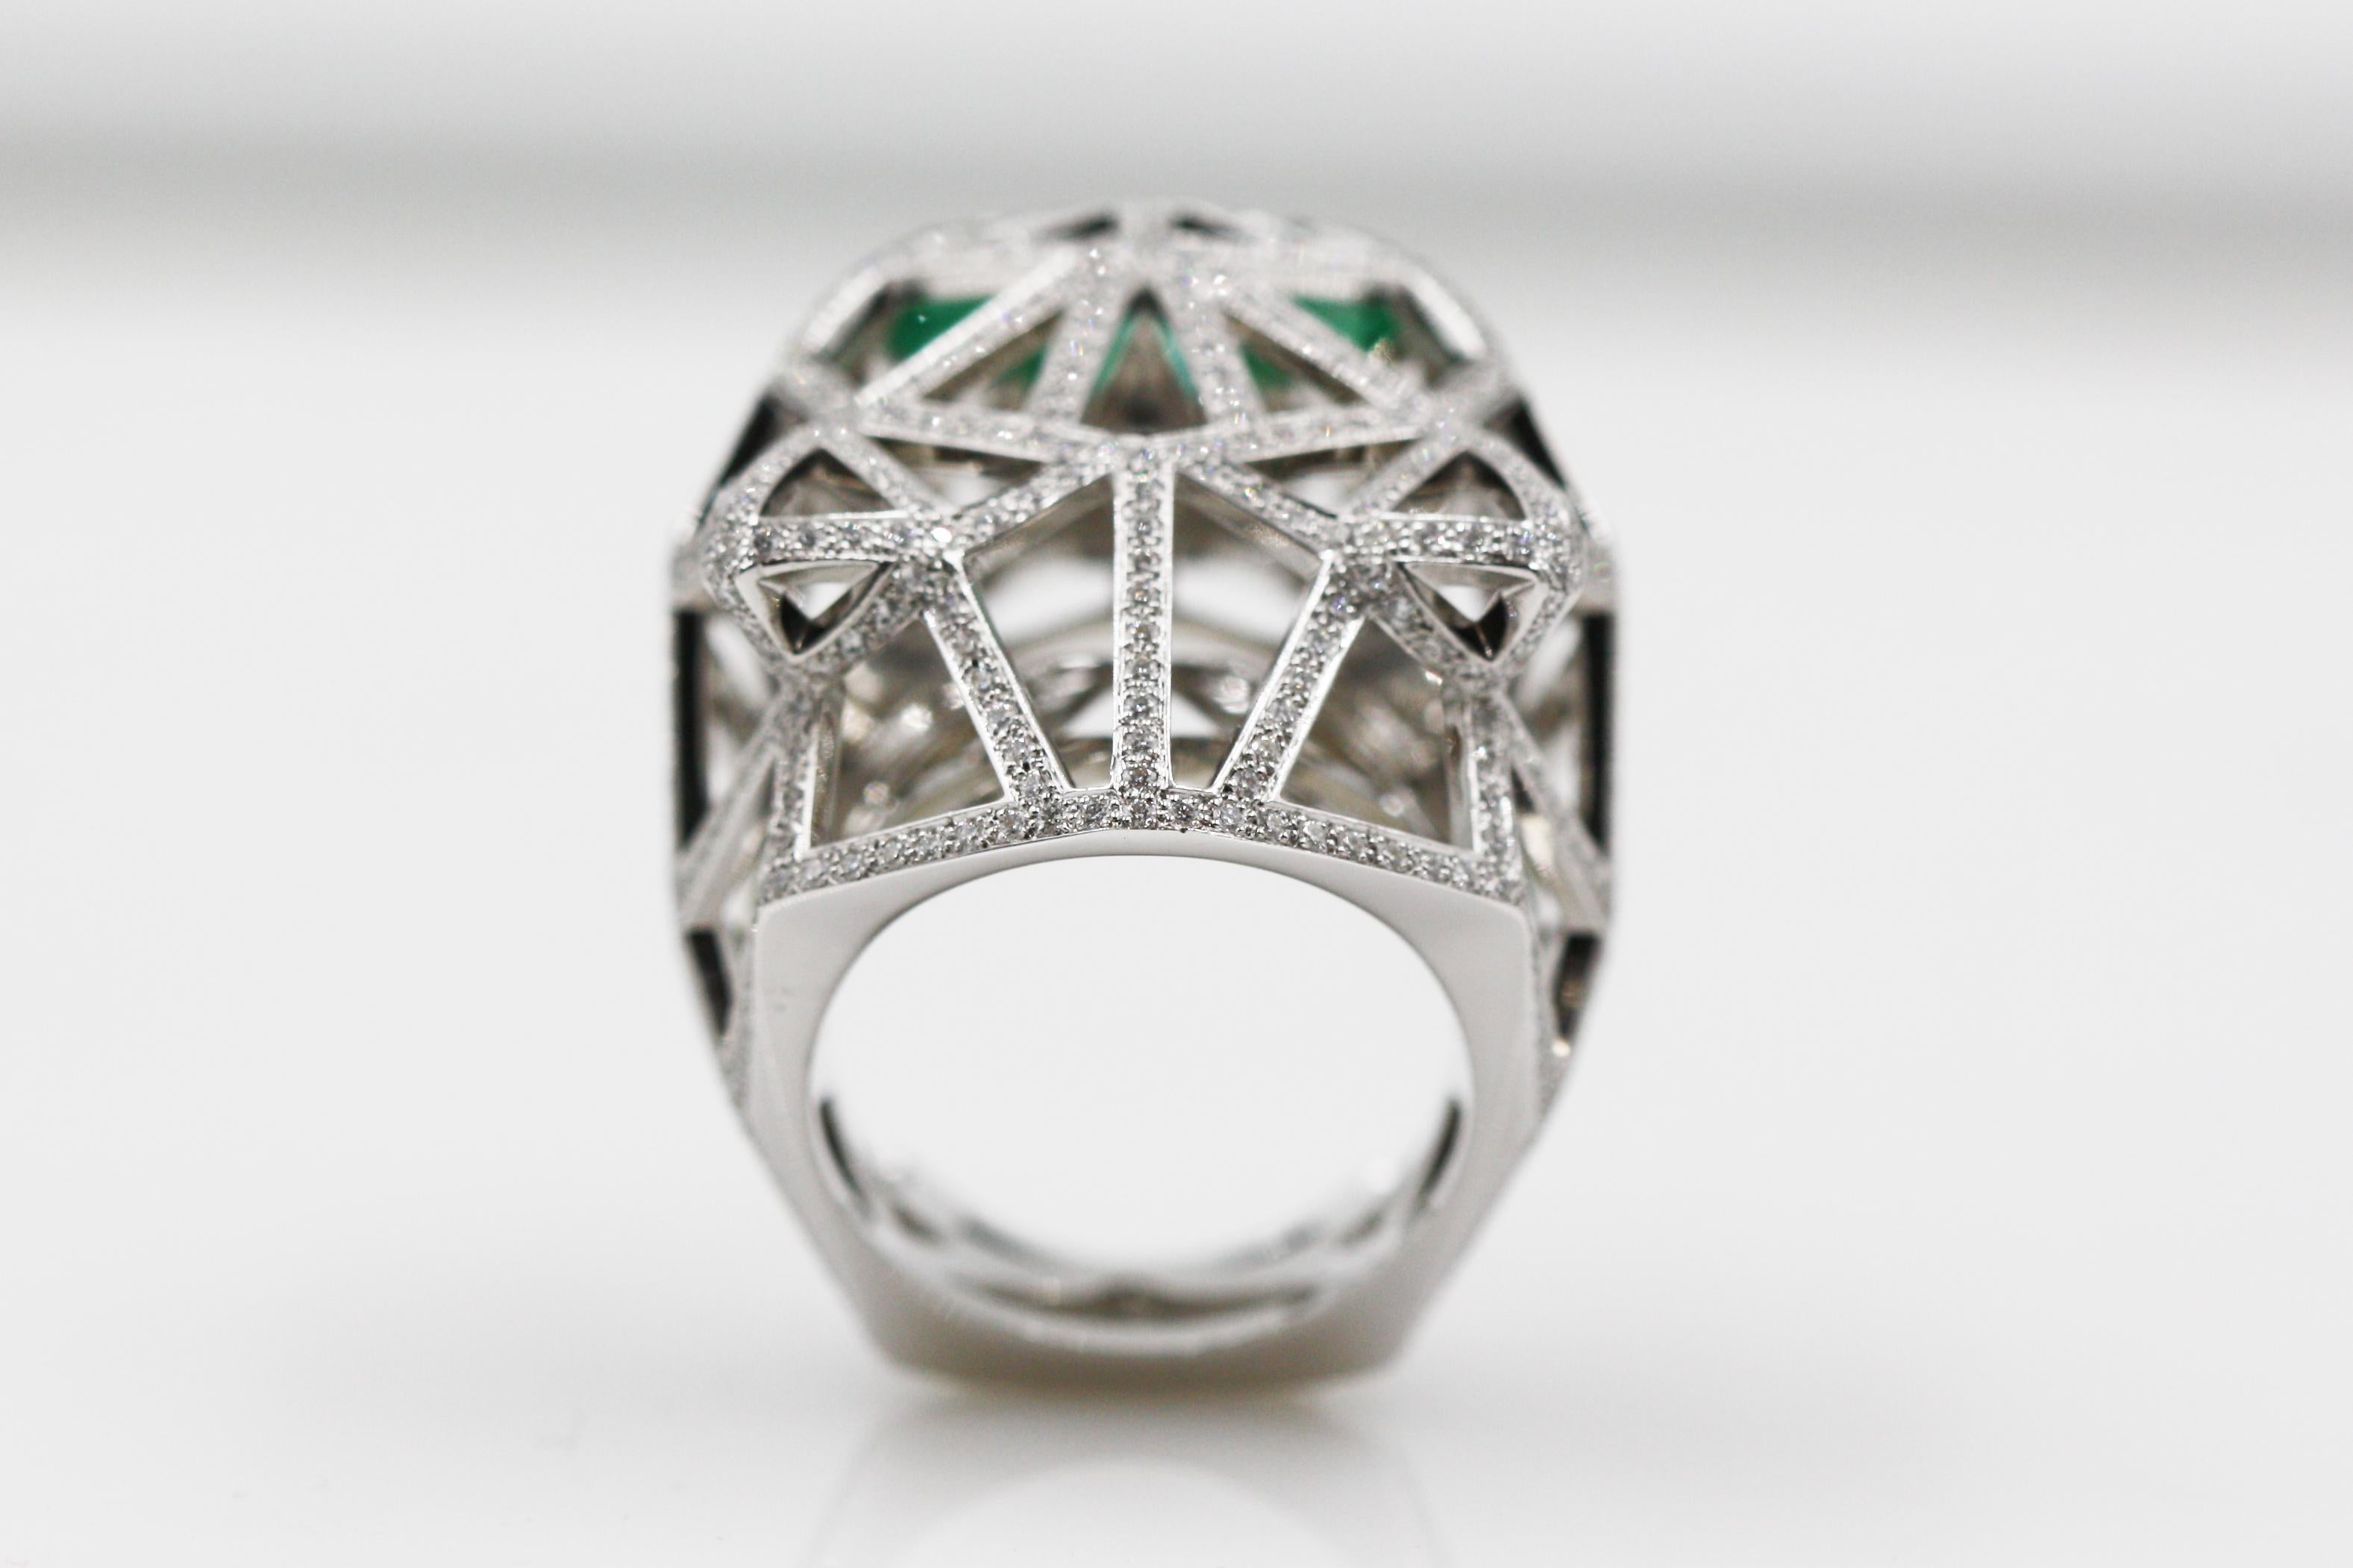 Cartier Panthere De 18 Karat White Gold Ring, Emeralds Onyx Diamonds In Excellent Condition For Sale In New York, NY